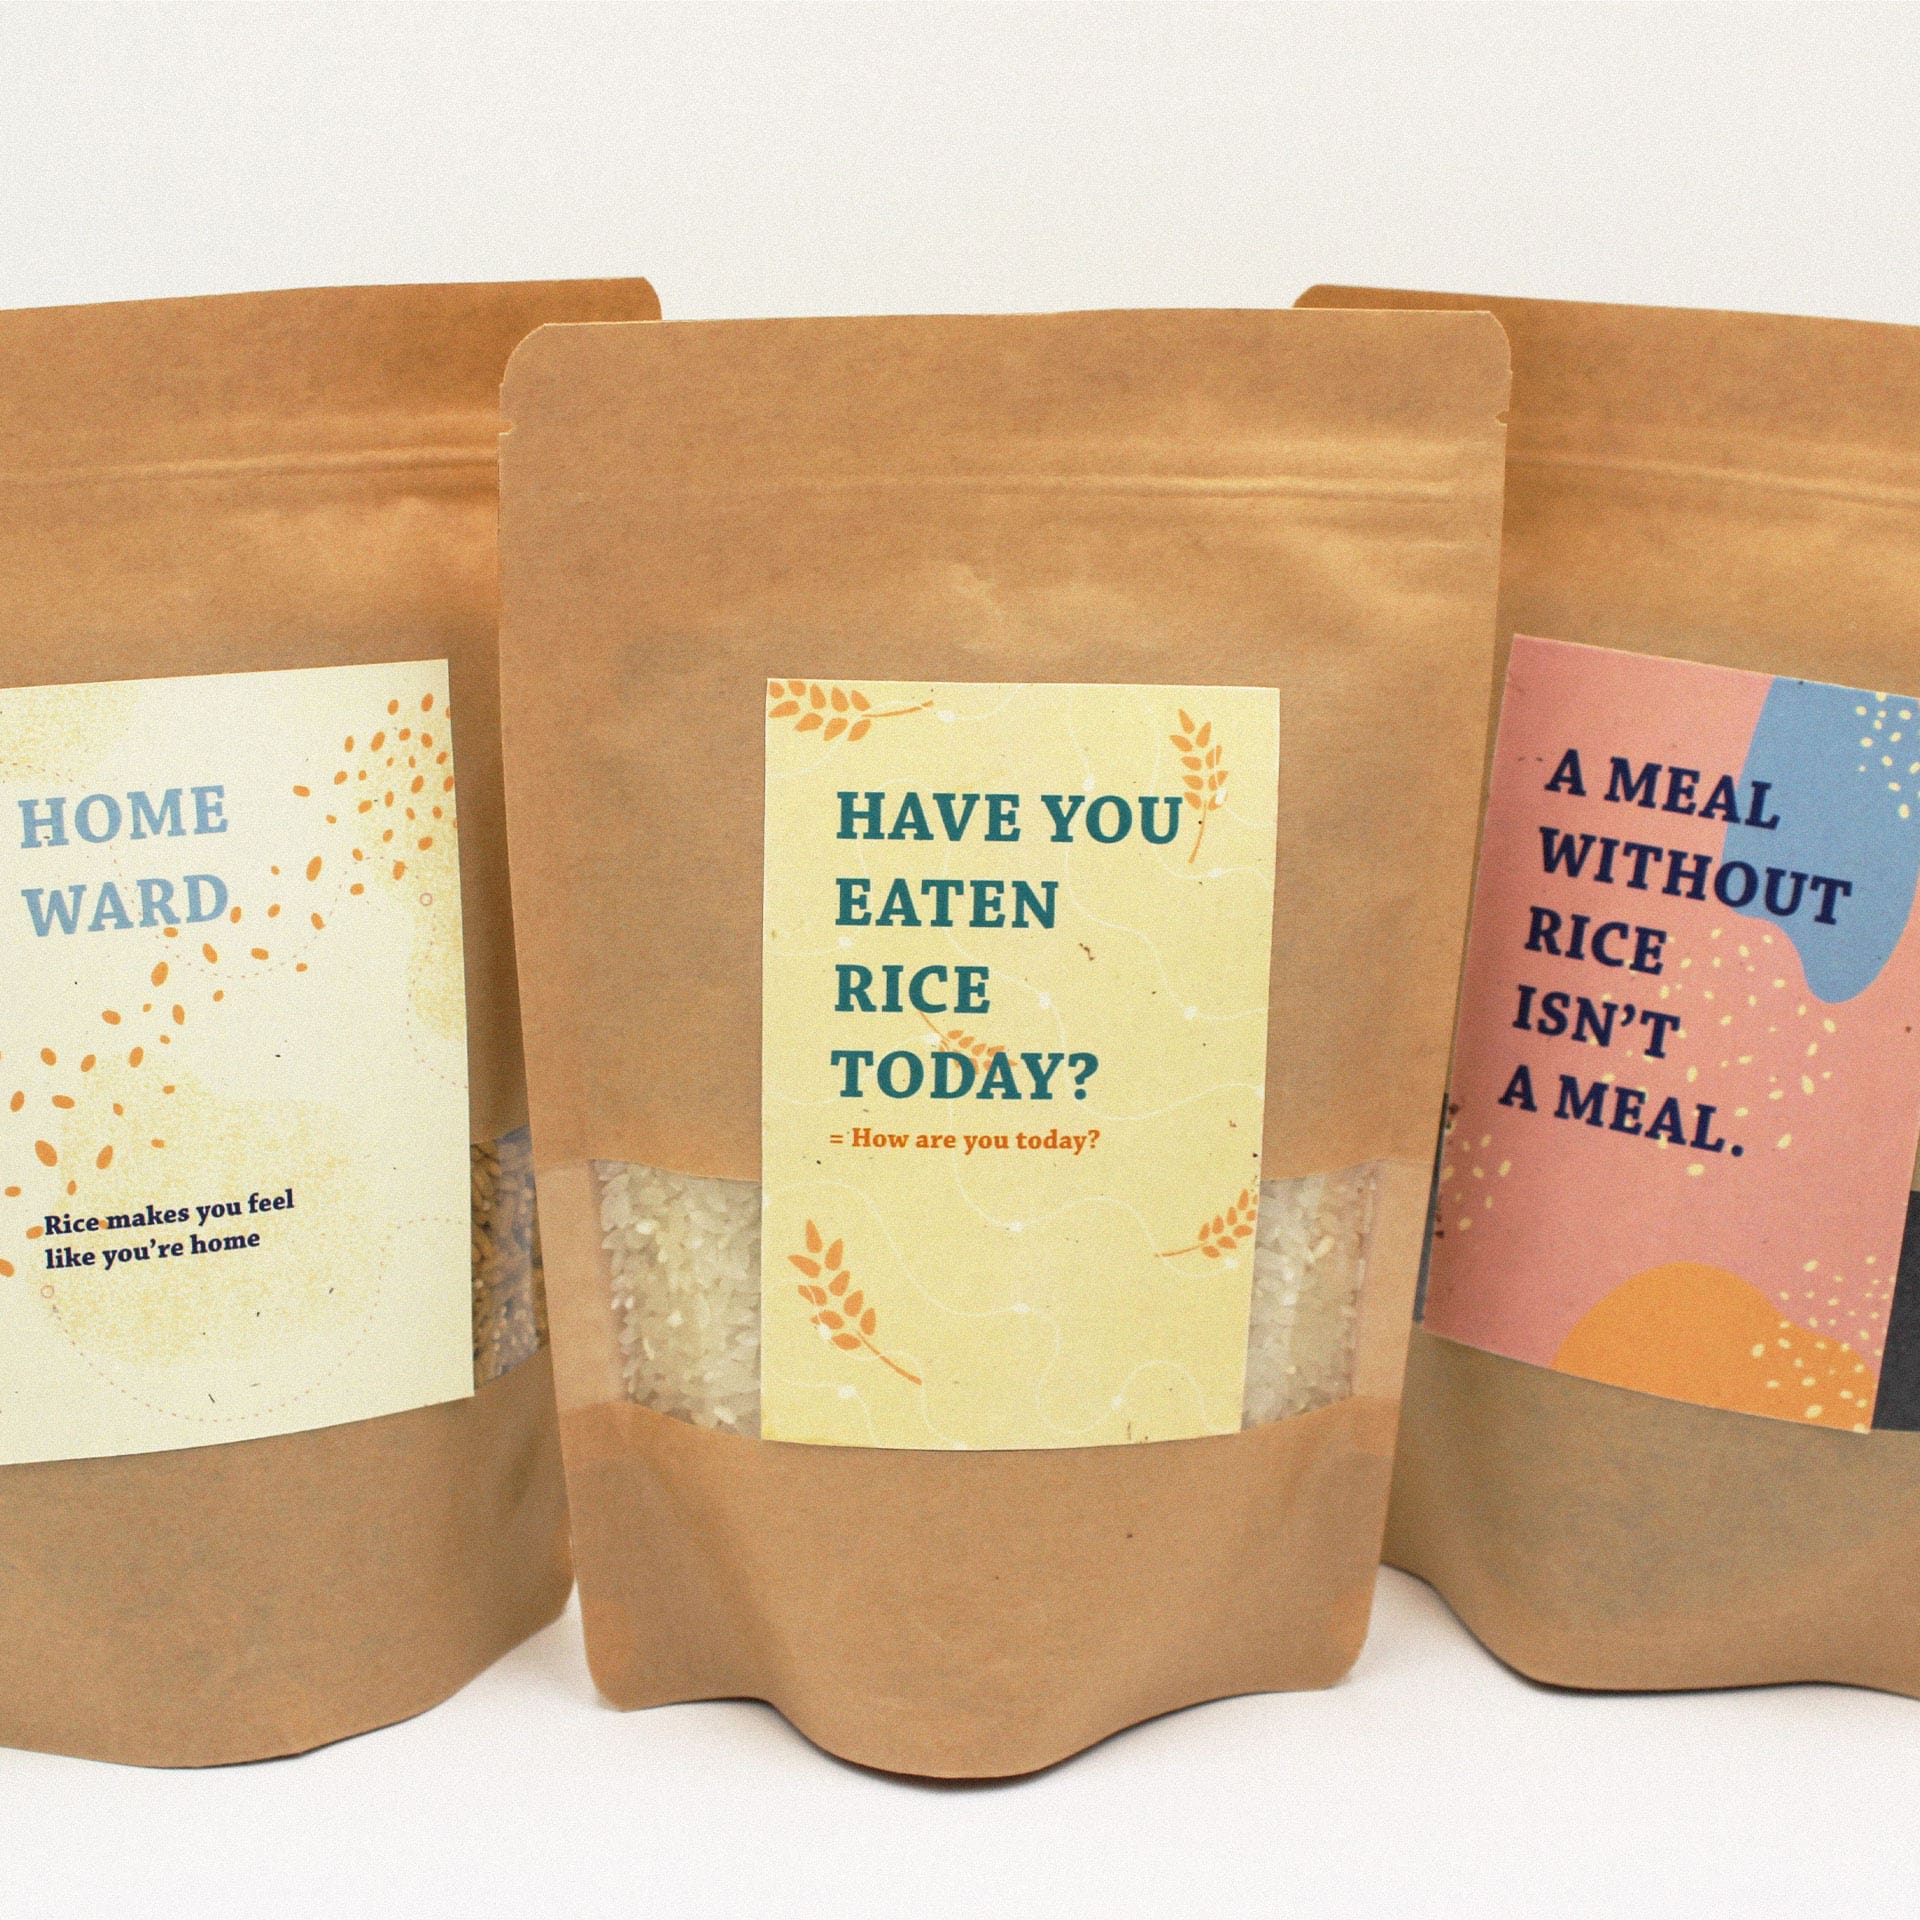 Photo of three brown paper bag packages of rice against a white background. each have a different rectangular label- the left is off-white, the center is yellow, and the right is pink. Each has different abstract shape decorations with a rice grain motif. The center bag reads "Have you eaten rice today?" in large blue text. The right bag reads 'A meal without rice isn't a meal." in large black text.